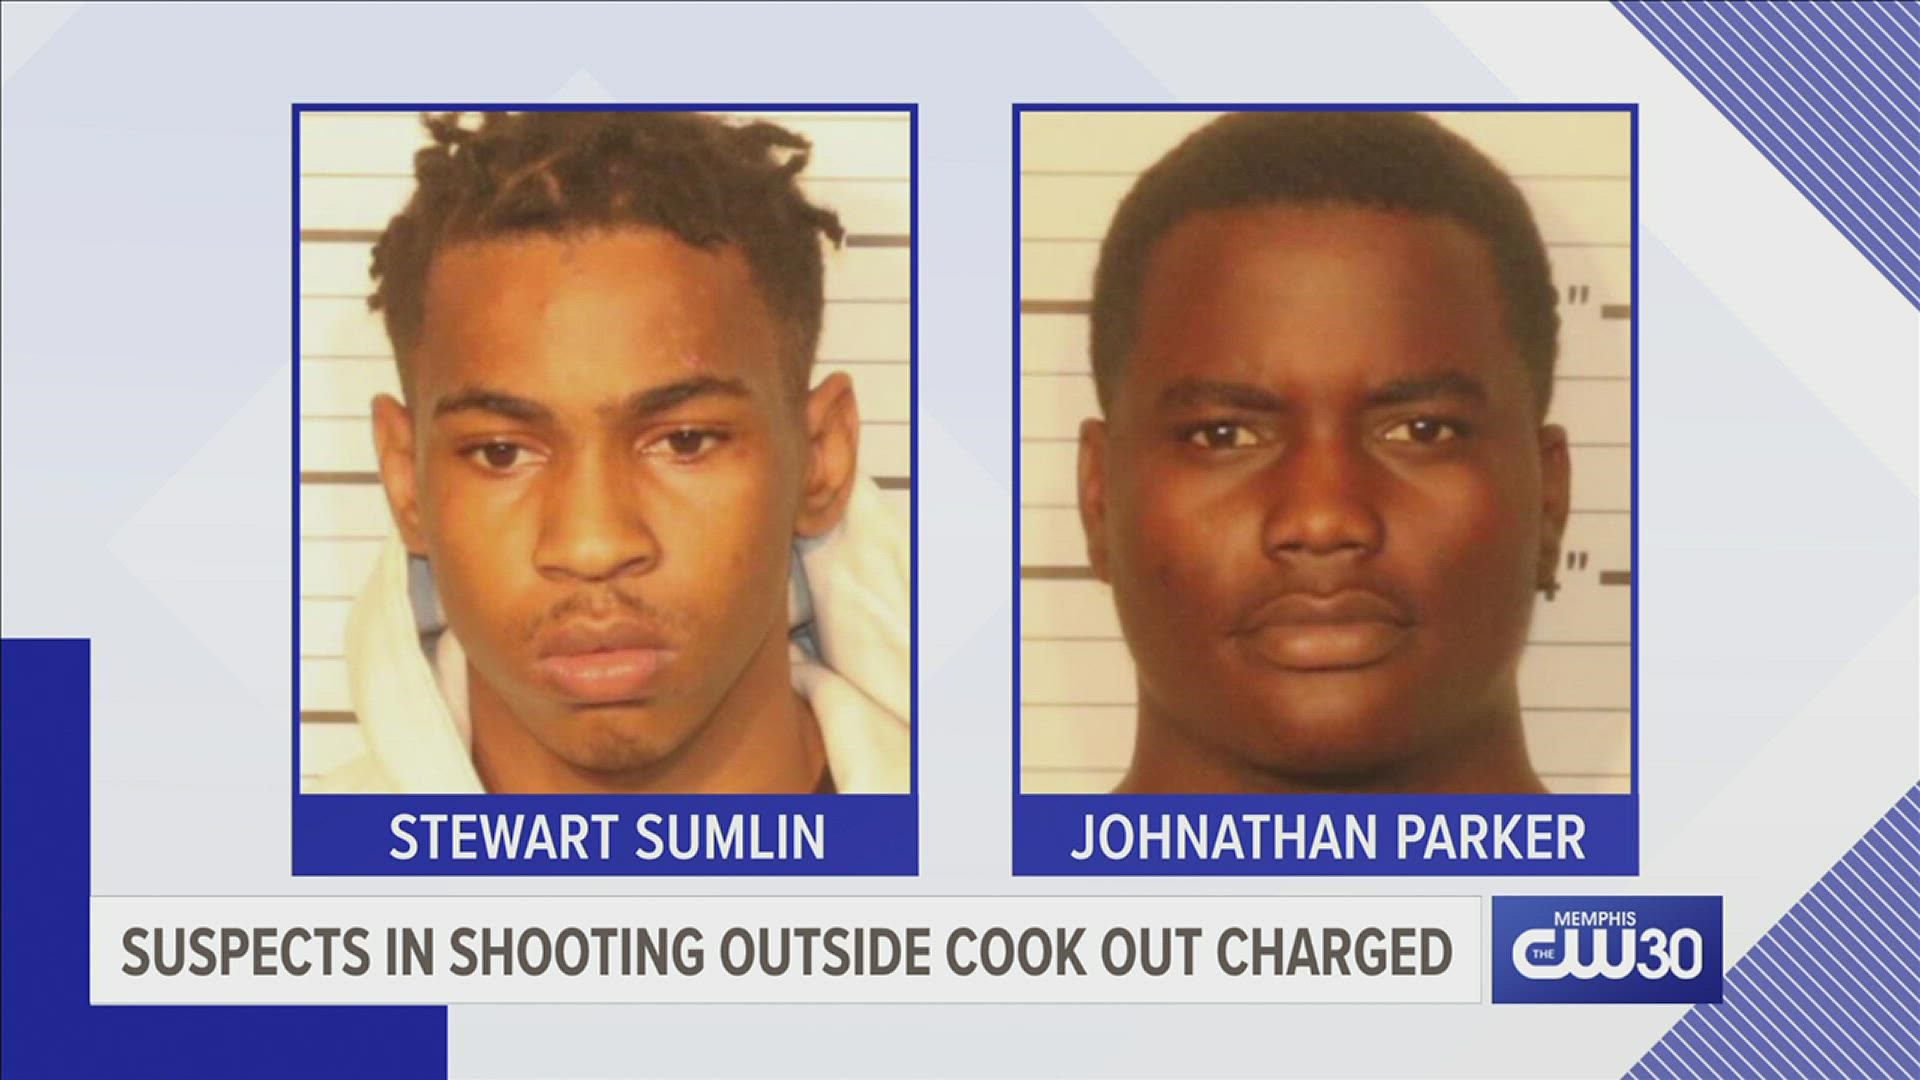 21-year-old Johnathan Parker and 19-year-old Stewart Sumlin are charged in the death of 18-year-old Carell Robinson outside the Cook Out on Union Avenue.